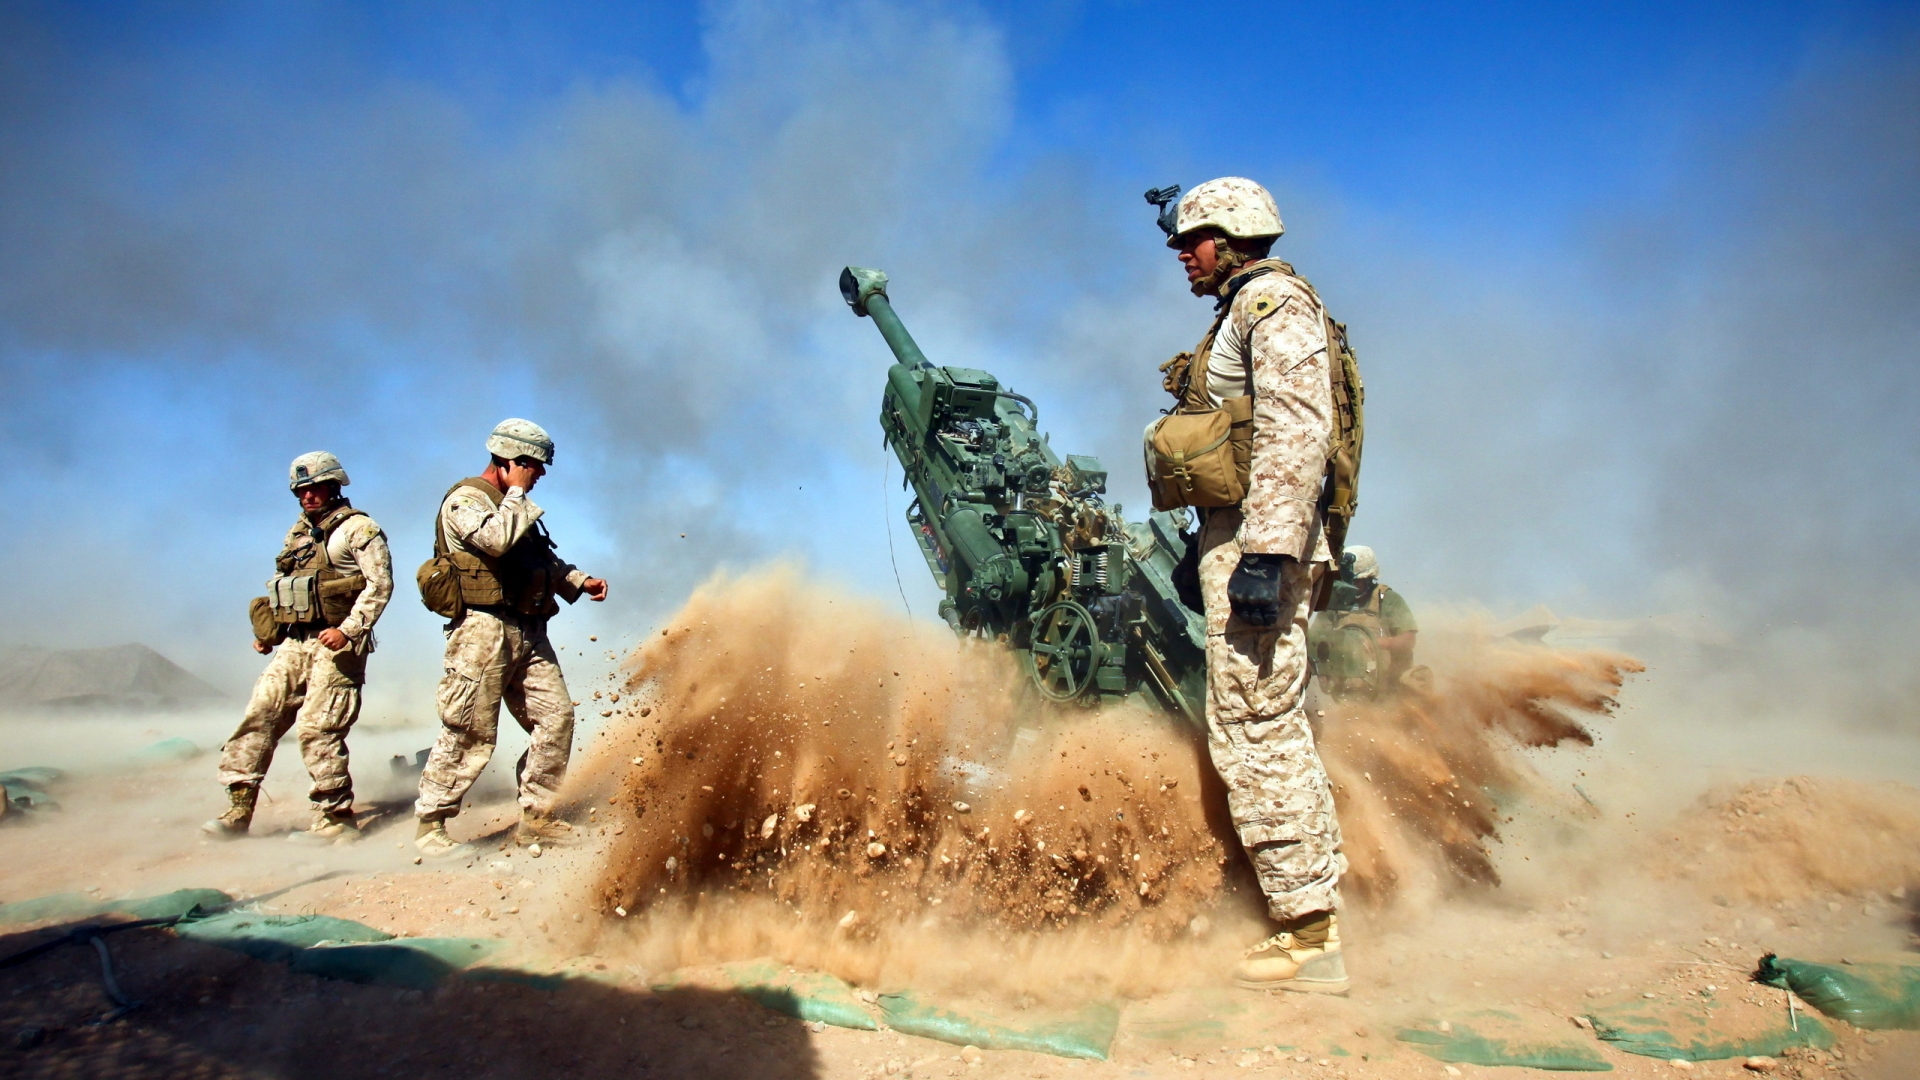 Howitzer and Soldiers for 1920 x 1080 HDTV 1080p resolution